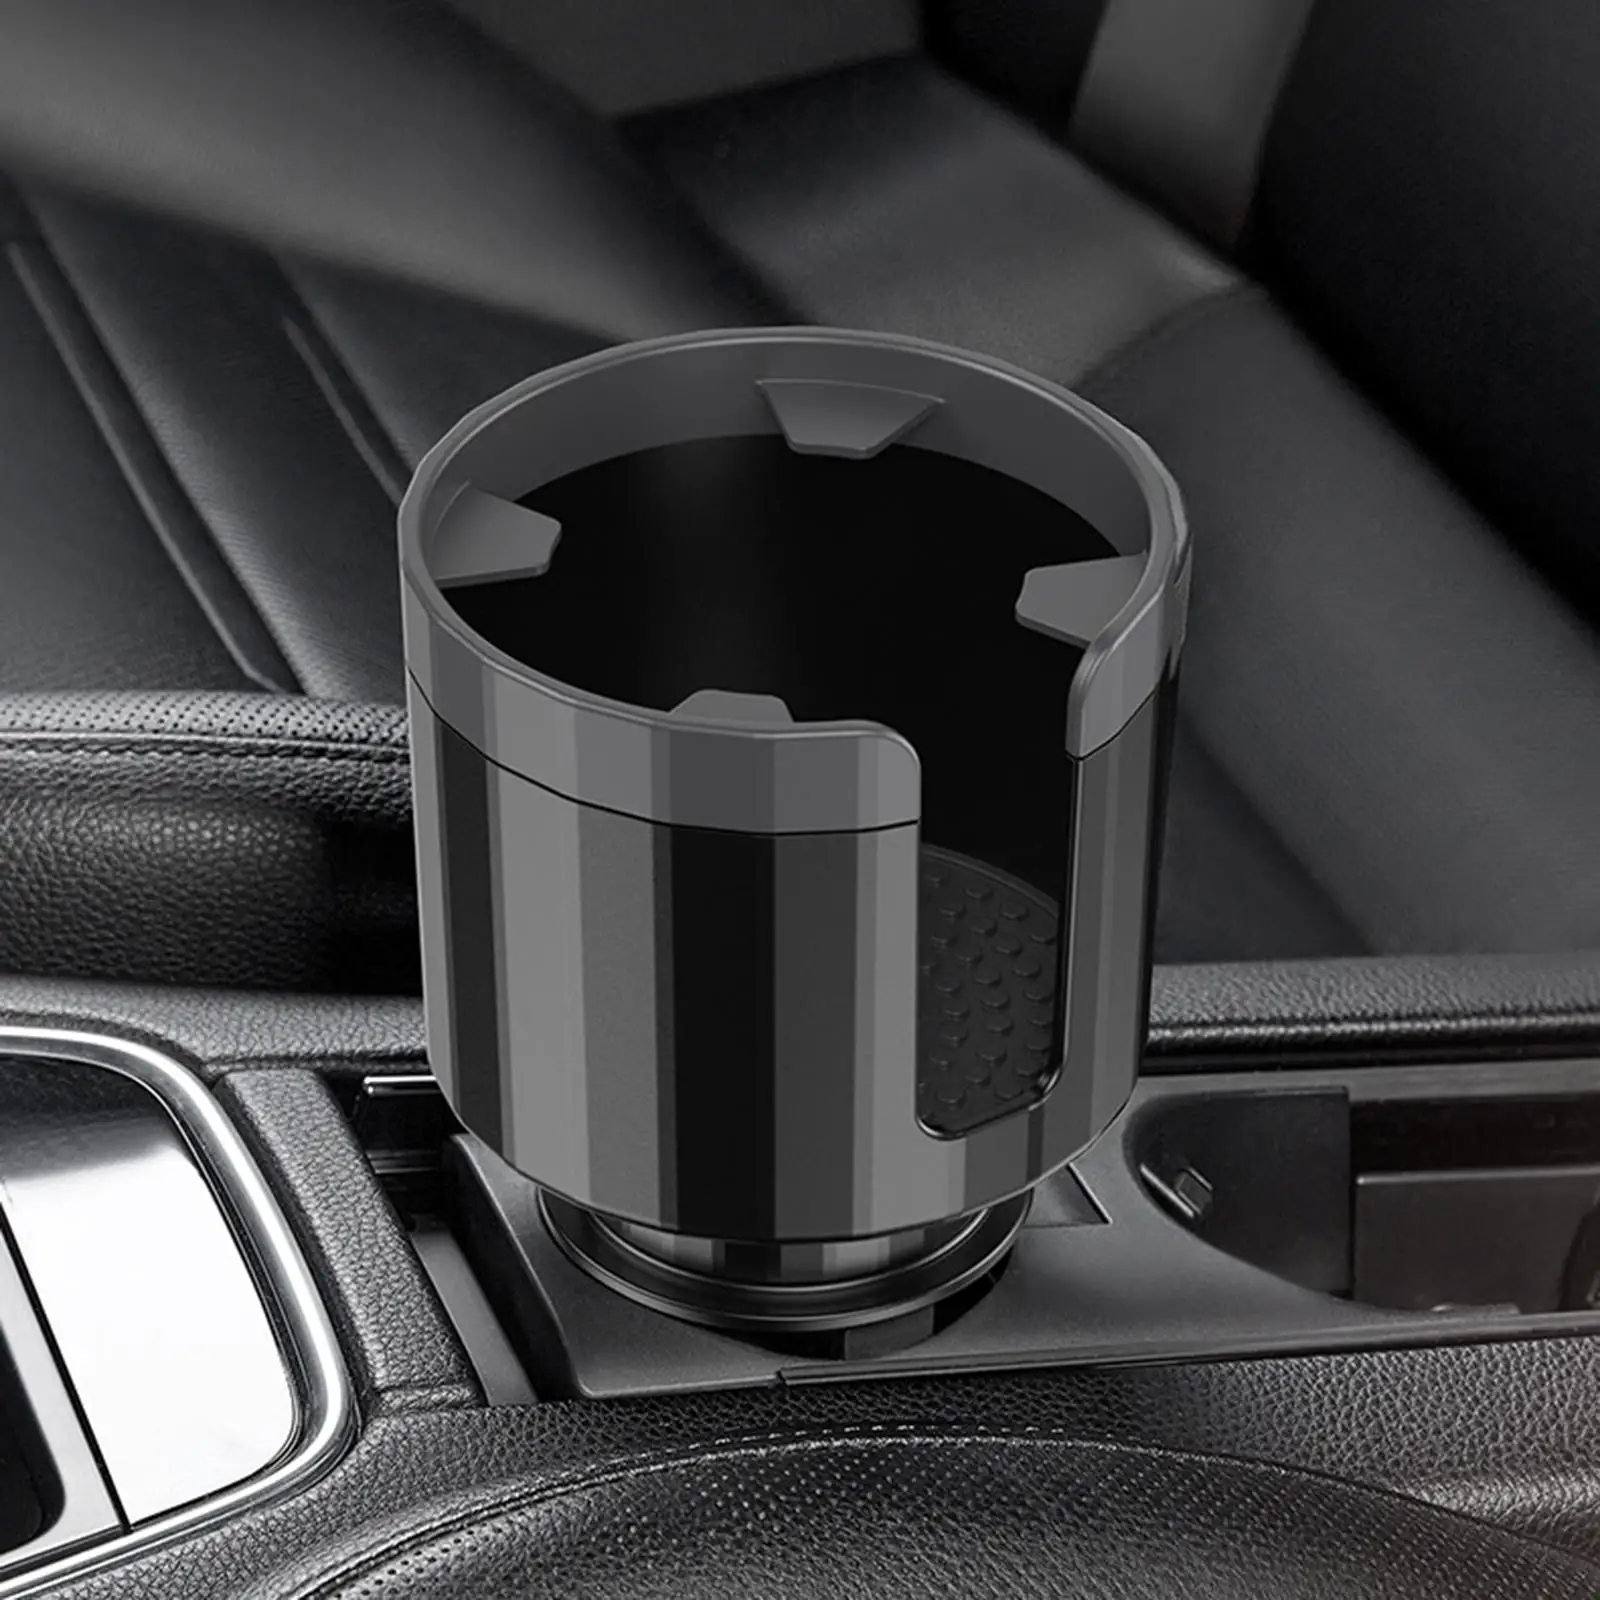 Car Cup Holder Expander Adapter Organizer Water Cup Holder Fit for Cups Premium